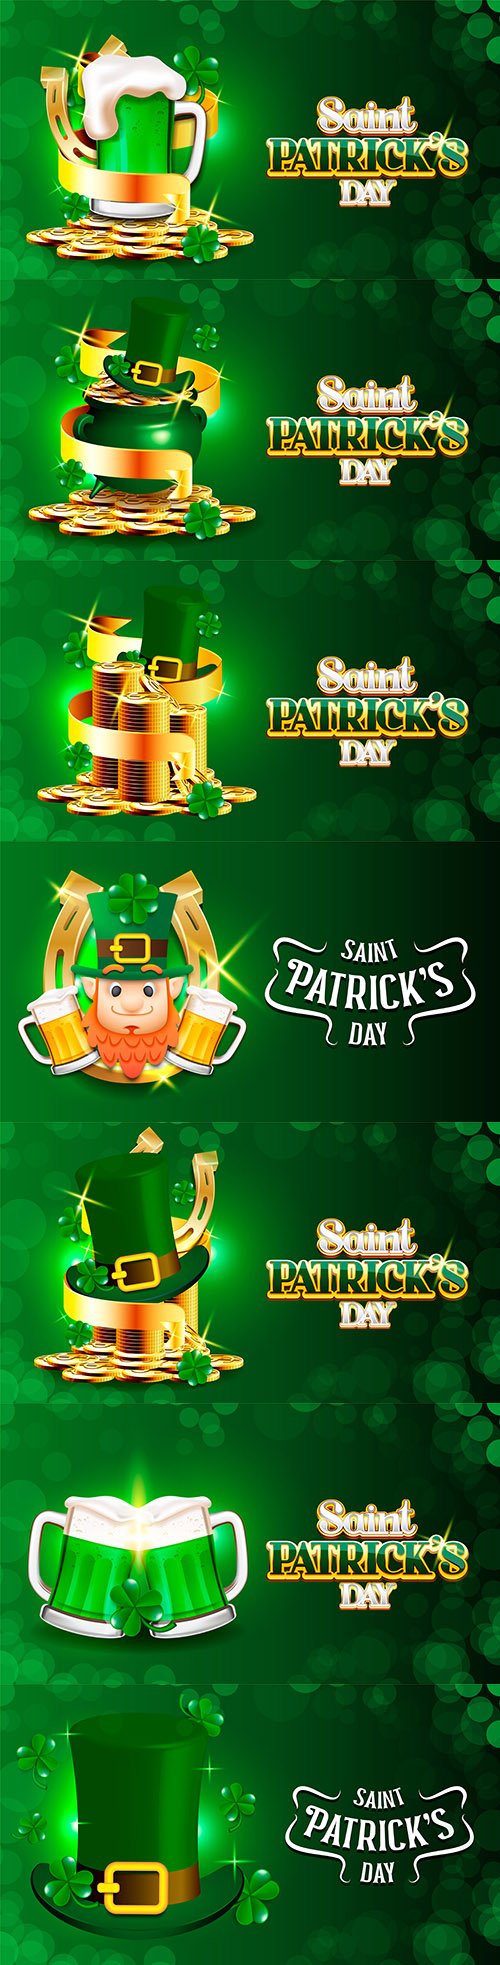 St. Patrick's Day party design vector illustrations 8